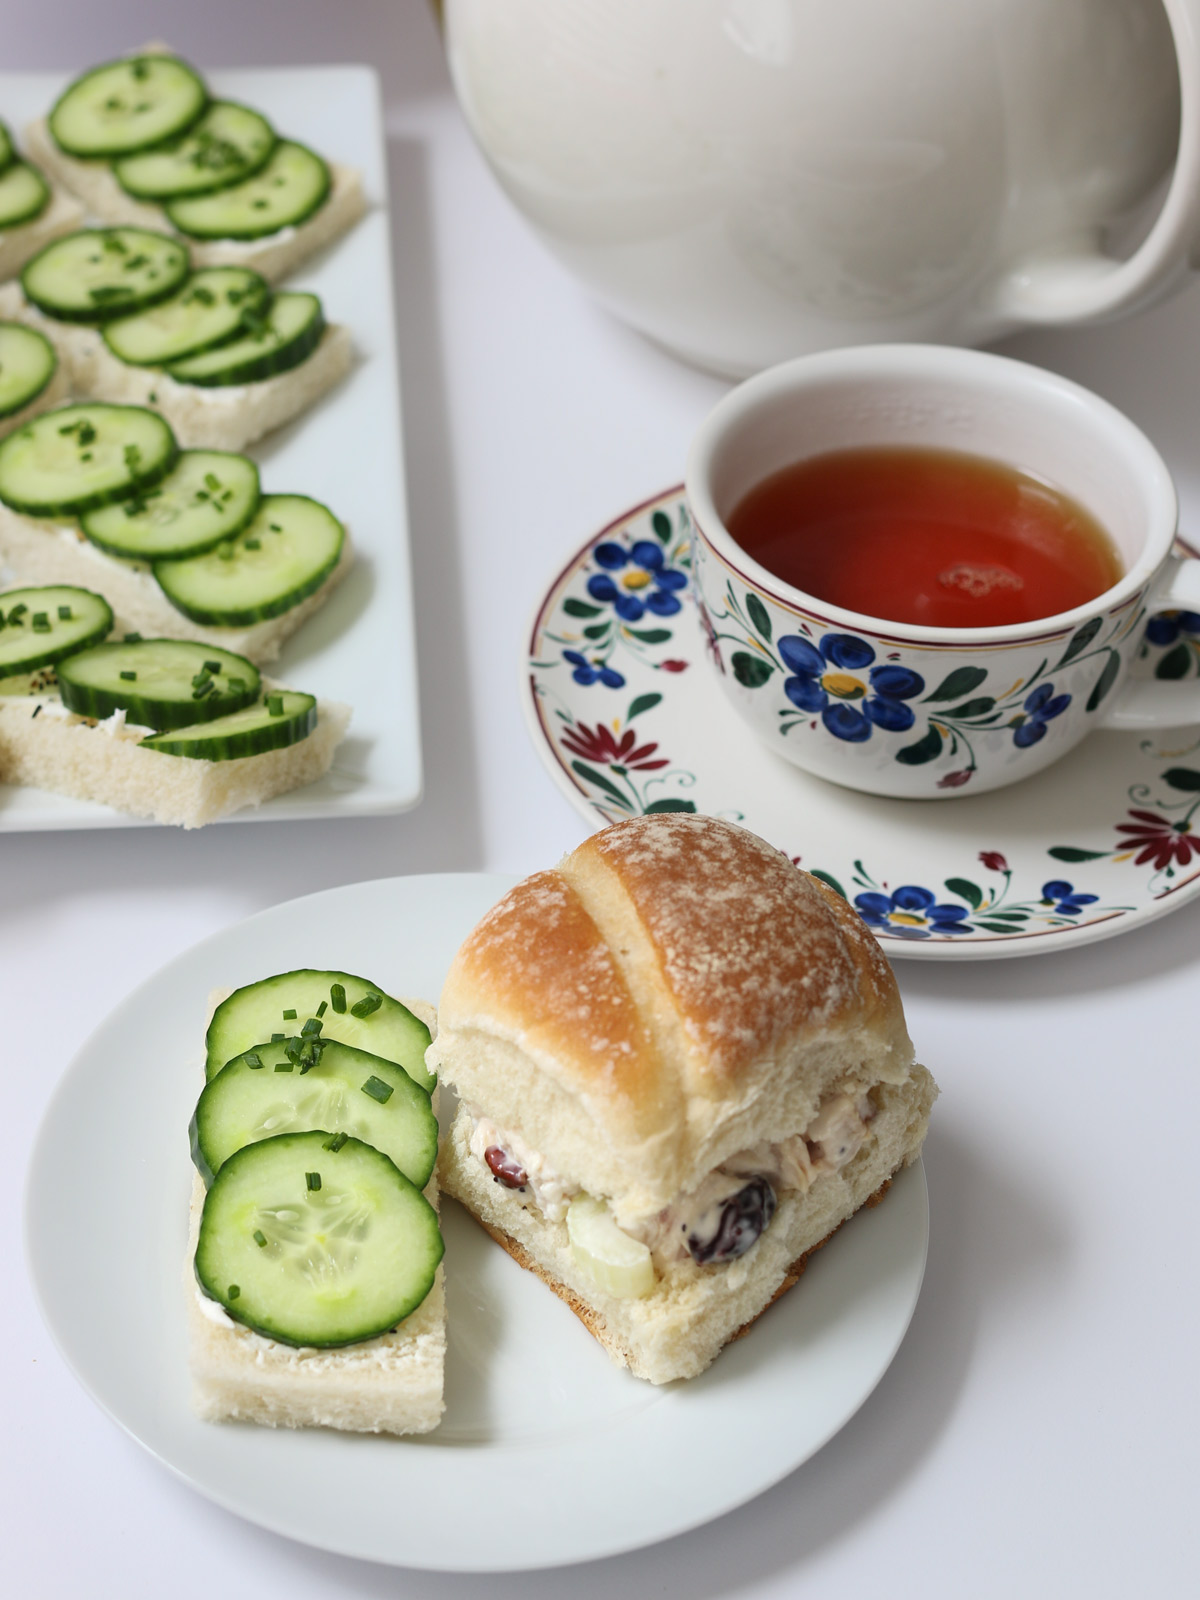 cucumber sandwich on plate with a small chicken salad sandwich, platter and tea behind them on table.